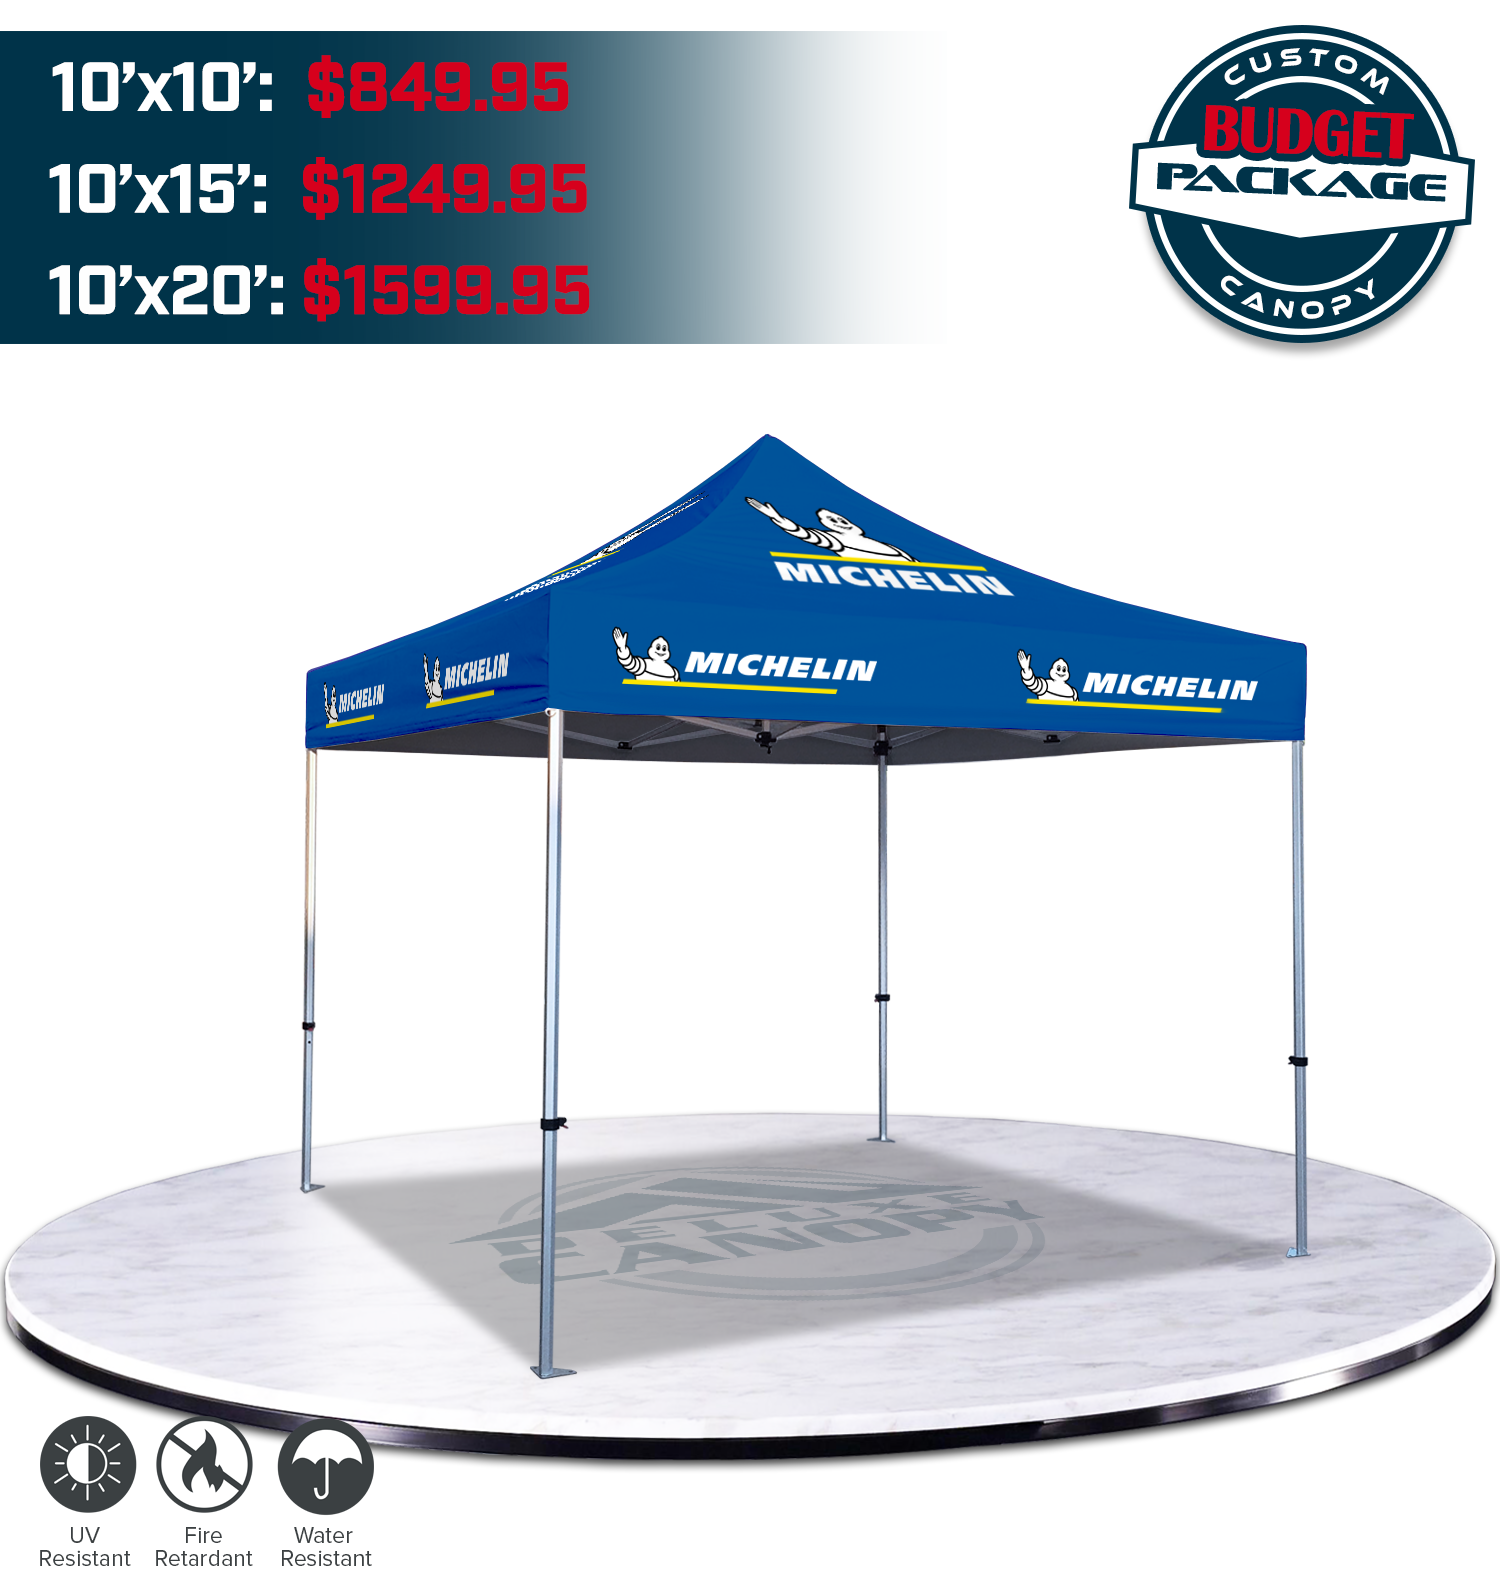 Custom Printed Pop Up Canopy Tent Budget Branded Tent With Logo